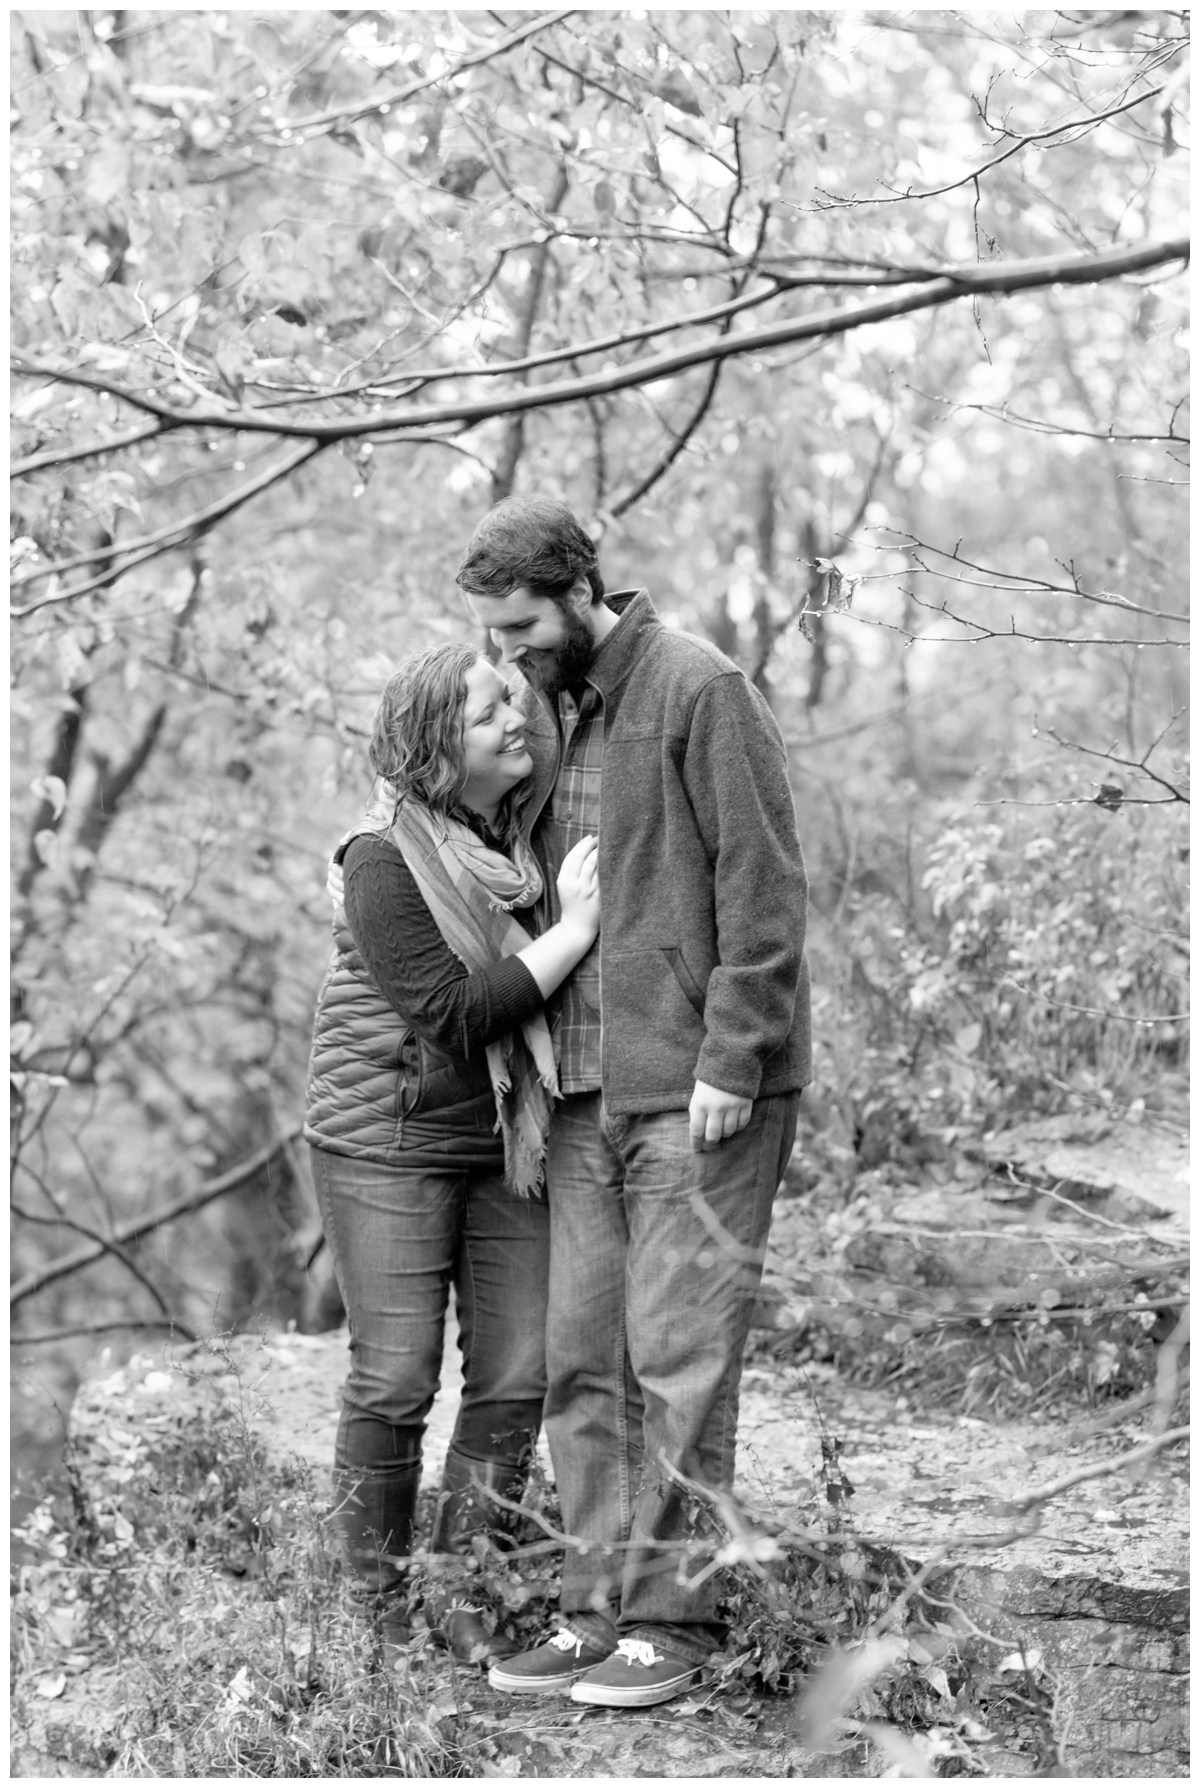 Amy Andrew Engagement Session High Cliff State Park Meghan Lee Harris Wisconsin Wedding Photographer Photography Woodsy Forest Beach Lakeside Rainy Romance Romantic